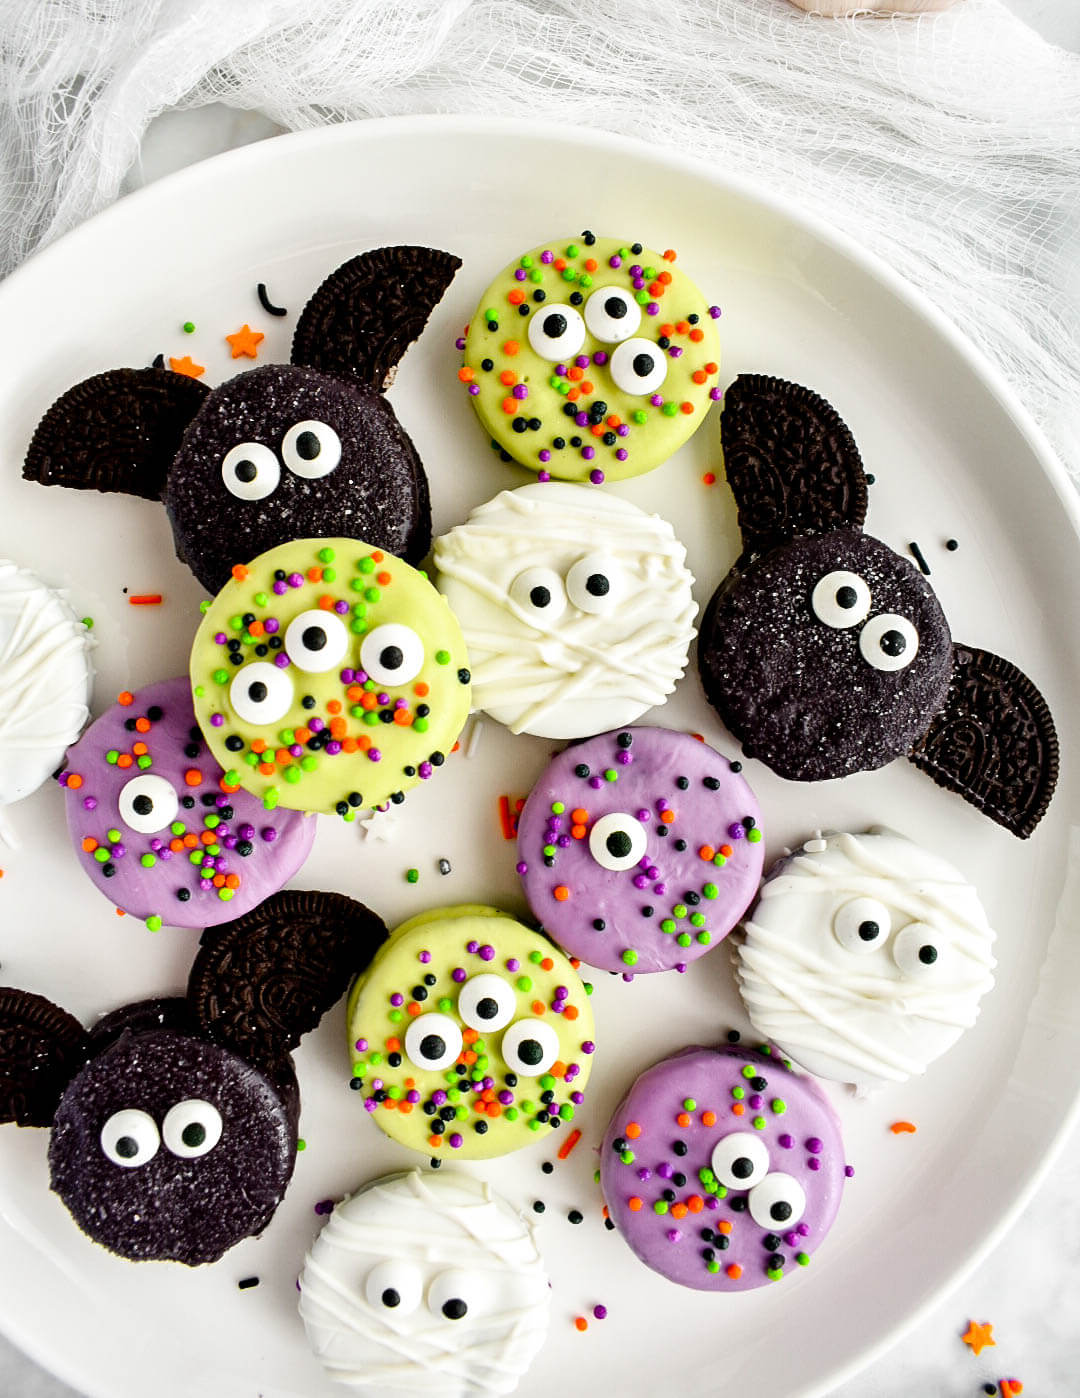 Halloween Chocolate Covered Oreos are decorated to look like green monsters, mummies, bats, and purple monsters and are arranged on a white plate.